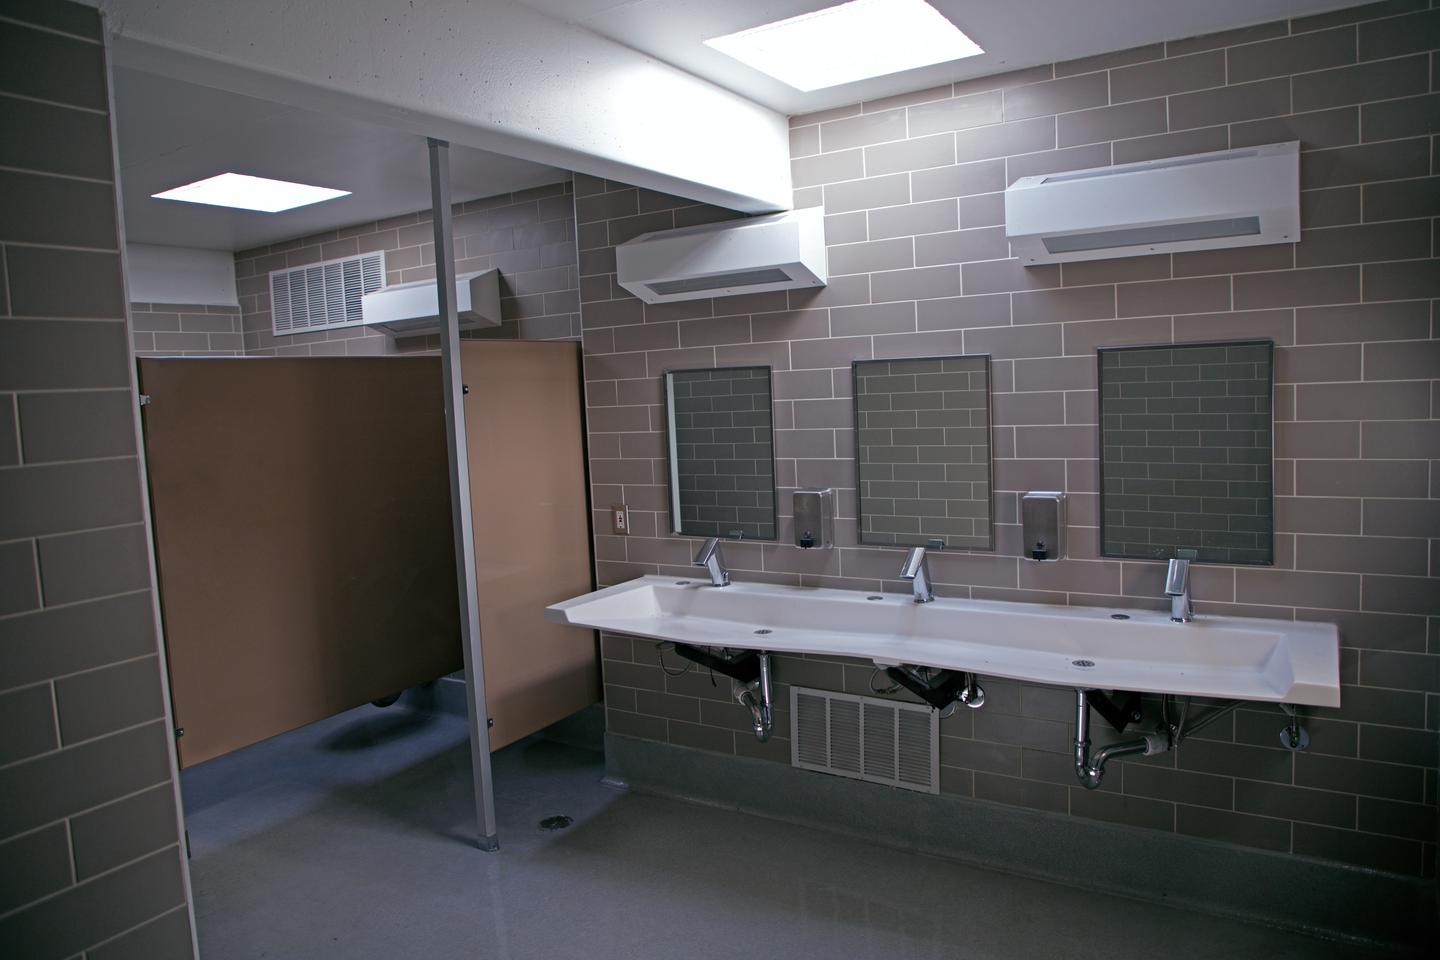 Newly (2021) remodeled restrooms